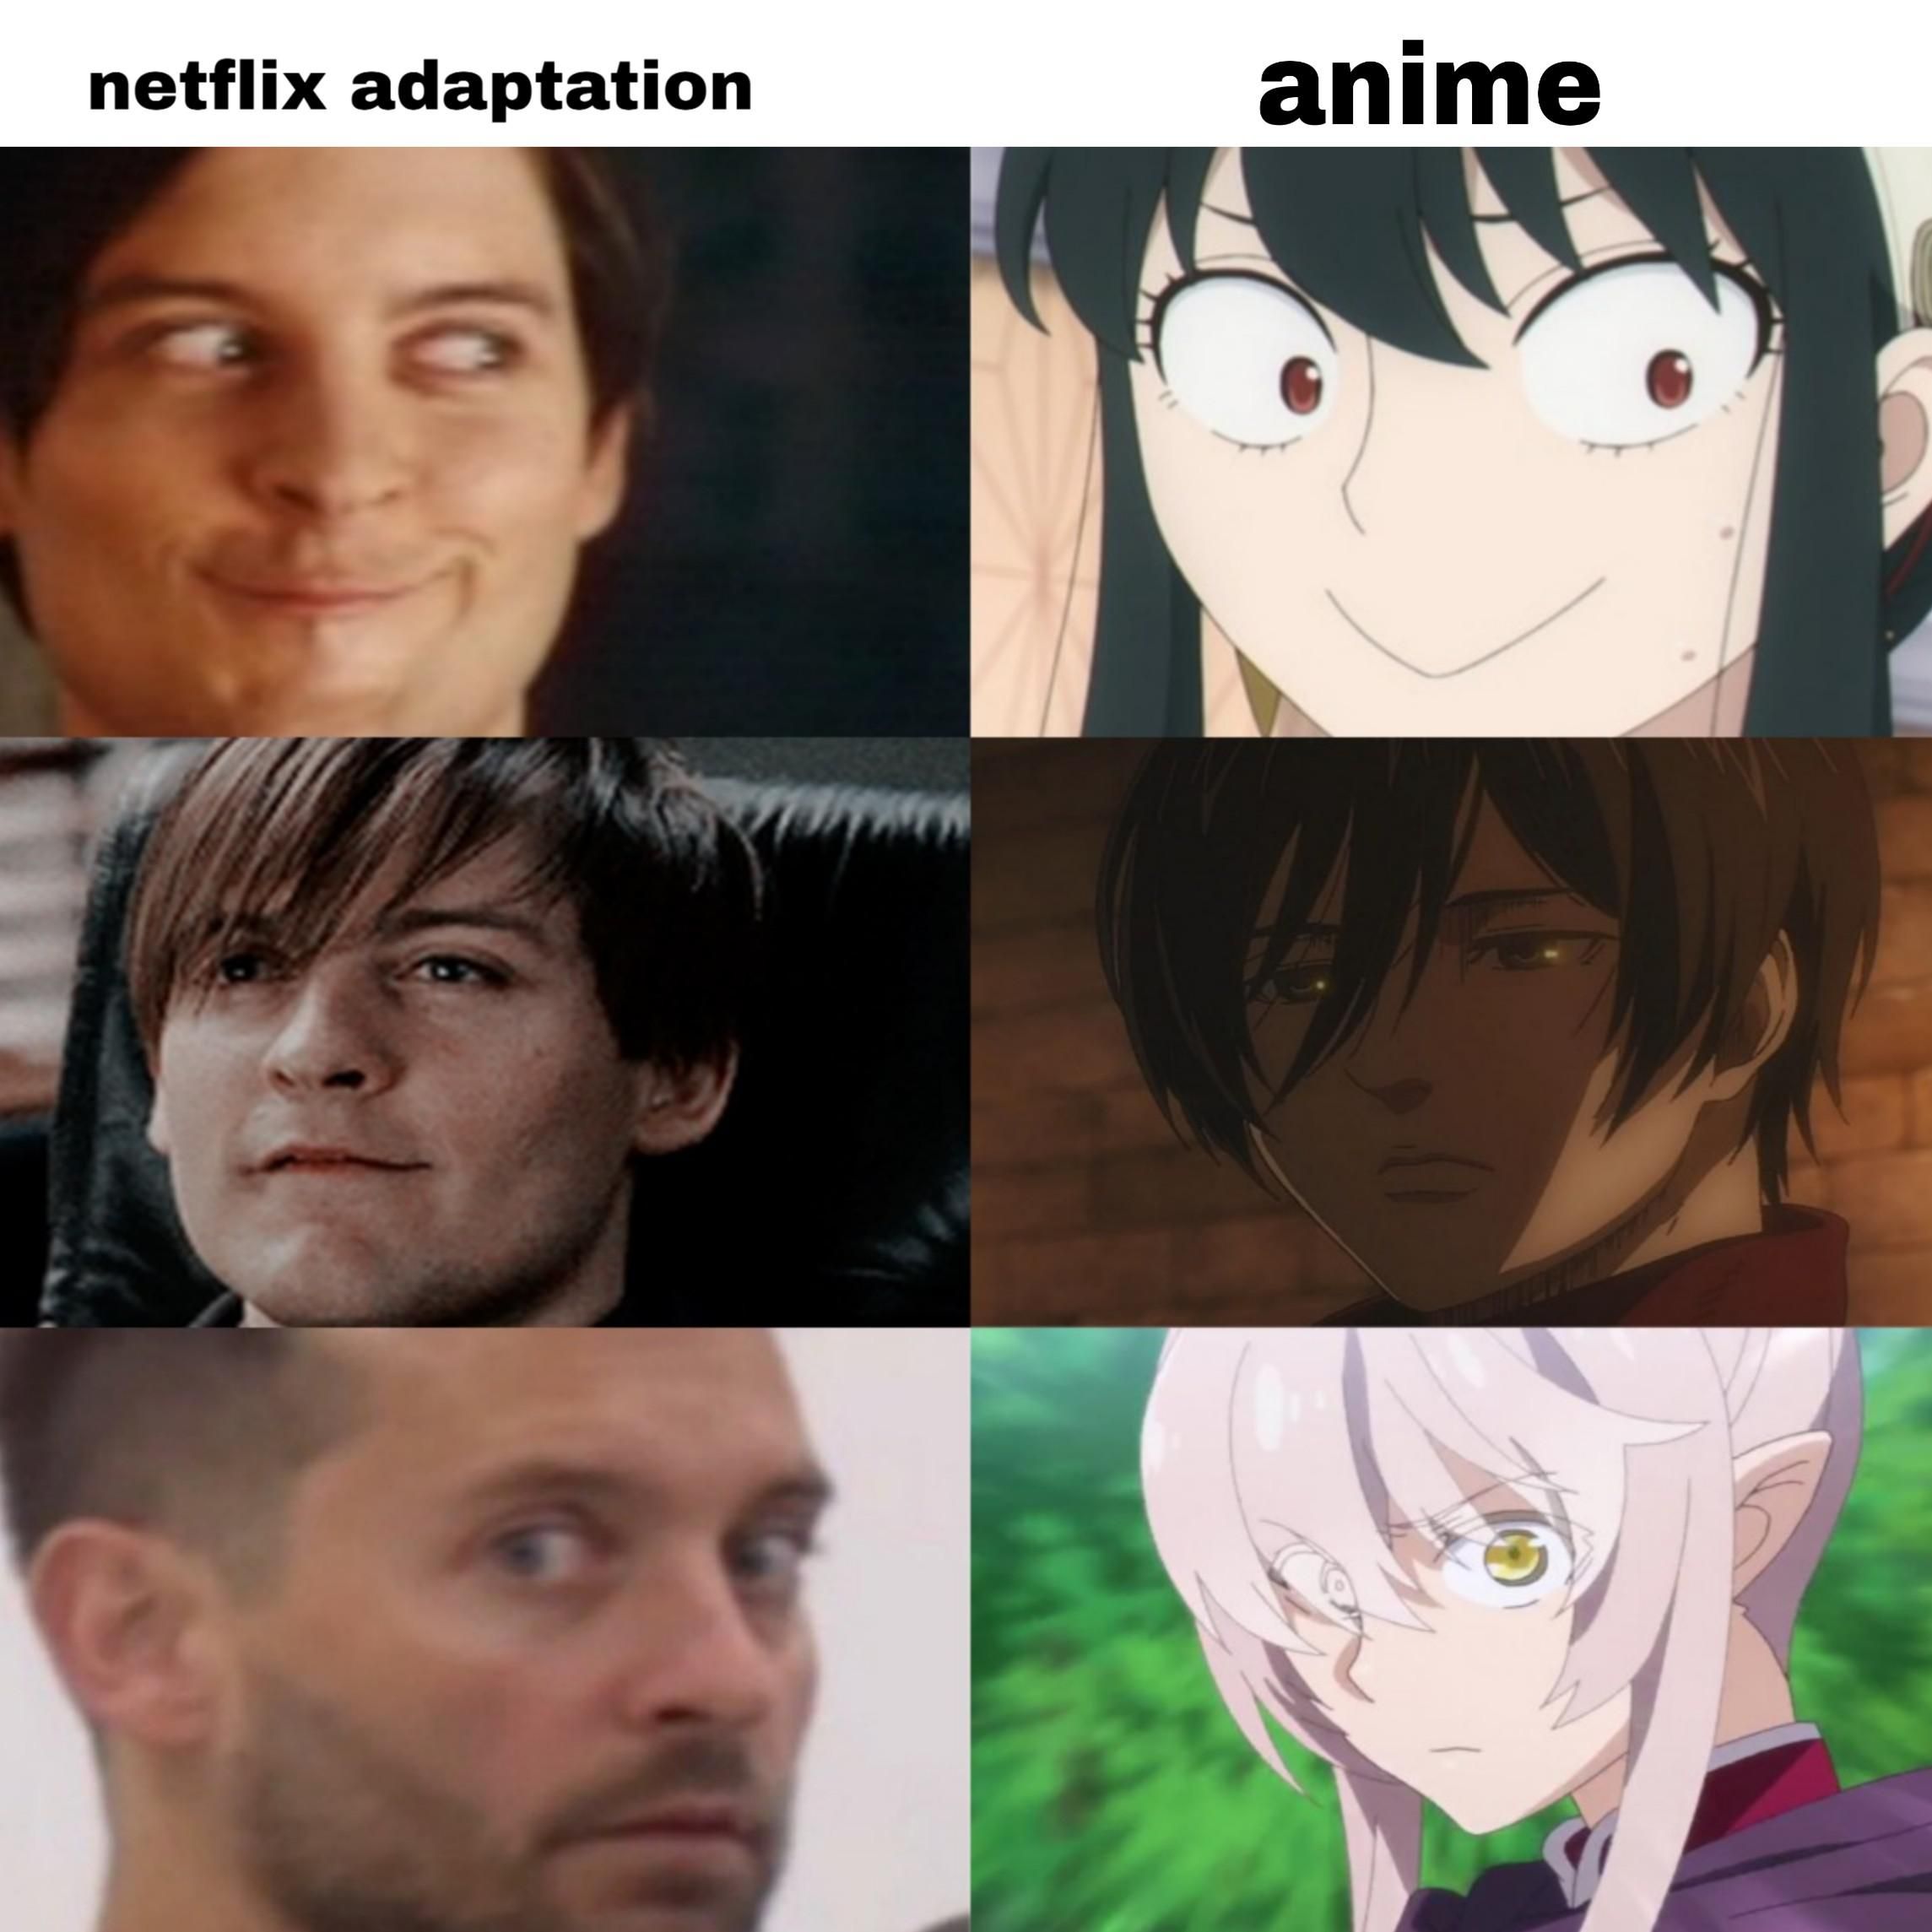 Tobey maguire is an anime girl